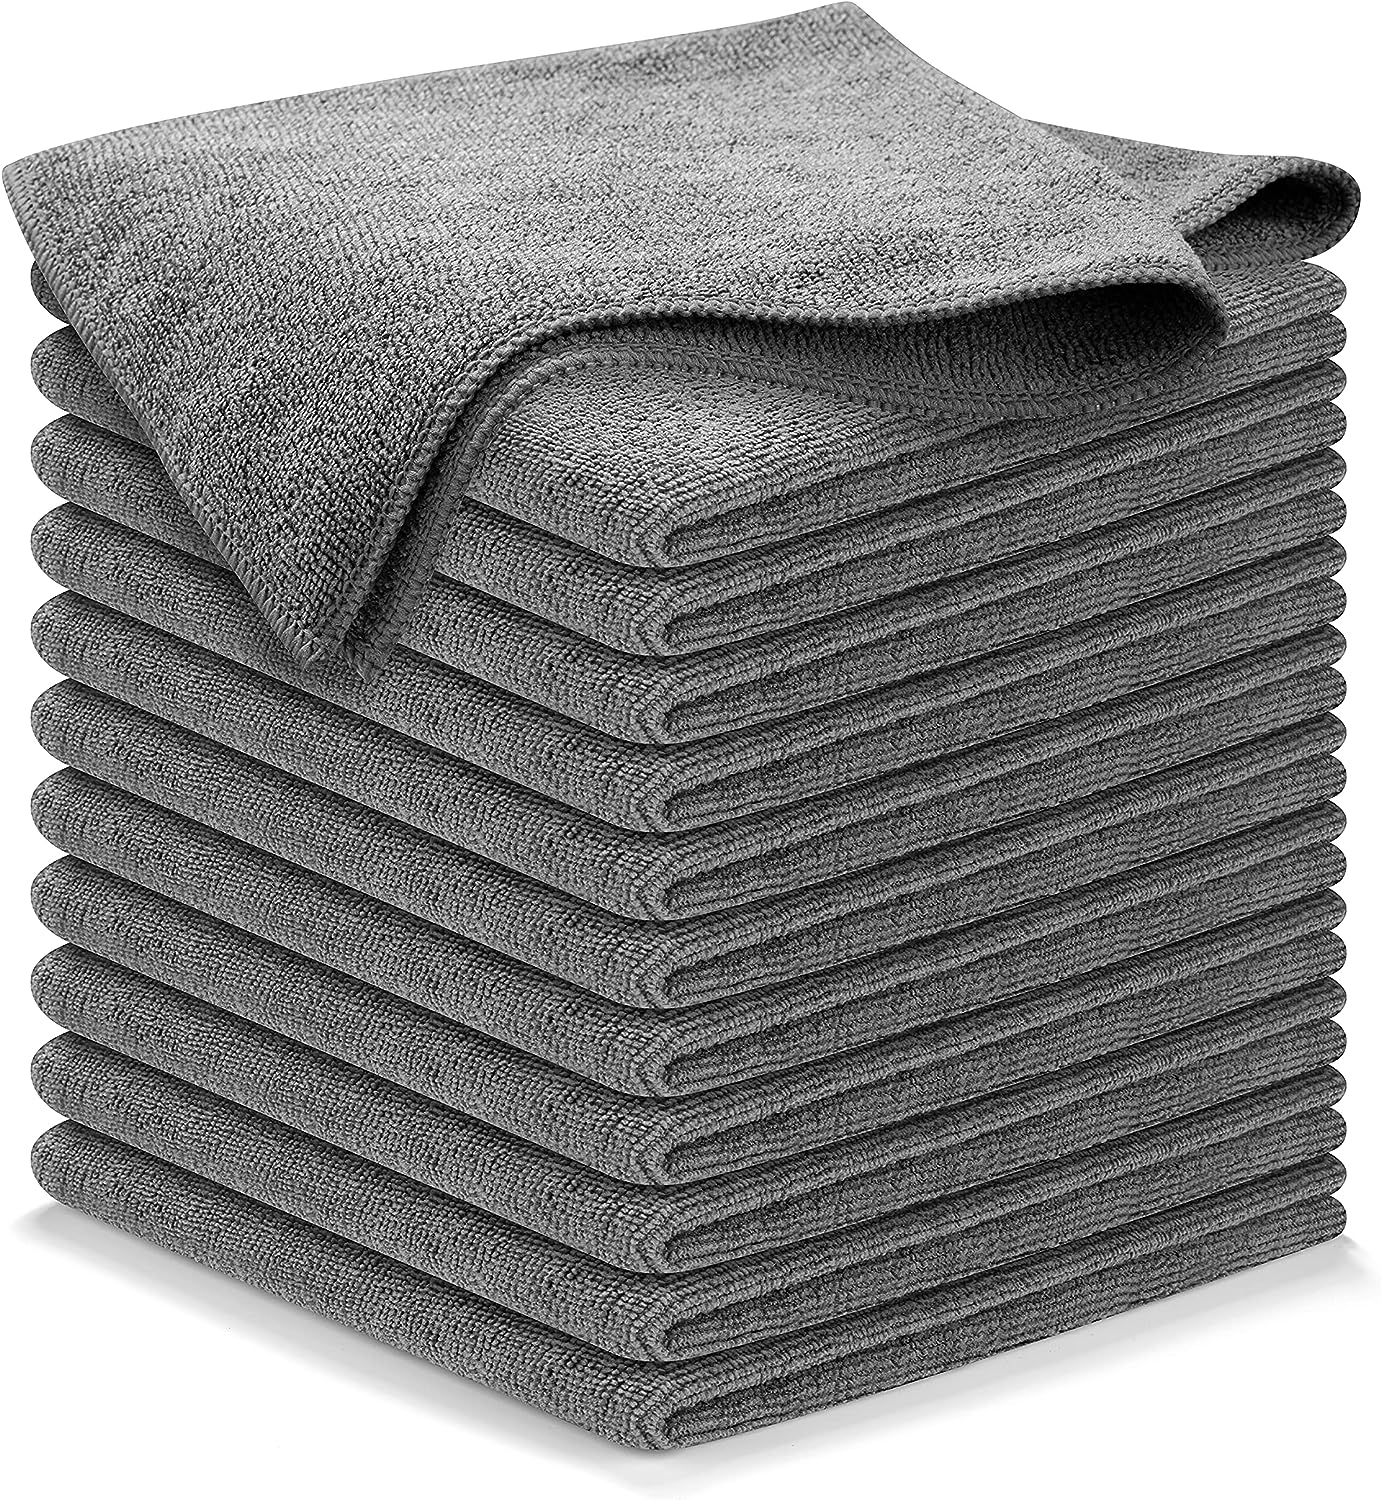 USANOOKS Microfiber Cleaning Cloth Grey - 12 Packs 12.6"x12.6" - High Performance - 1200 Washes, Ultra Absorbent Towels Weave Grime & Liquid for Streak-Free Mirror Shine - Car Washing Cloth